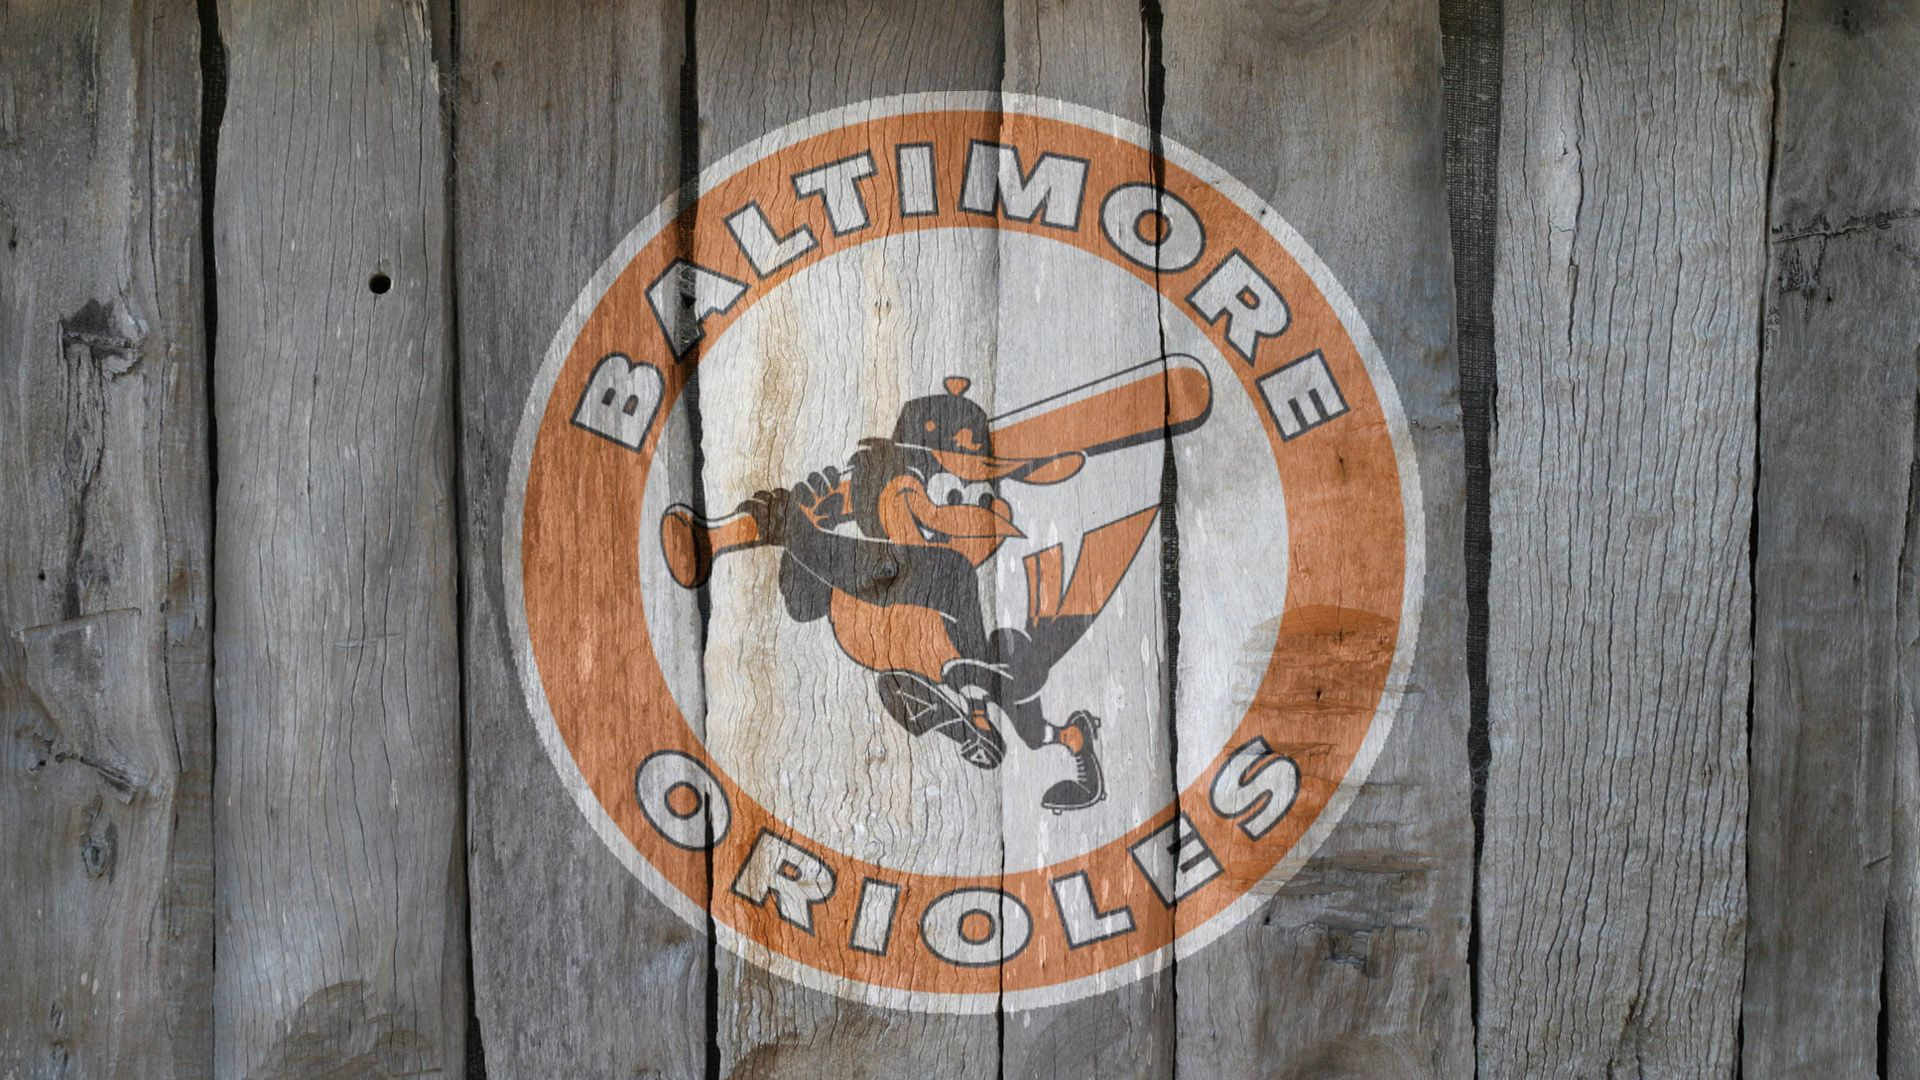 1920x1080 Baltimore Orioles Wallpapers, Browser Themes \u0026 More | Baltimore orioles wallpaper, Orioles wallpaper, Baltimore orioles